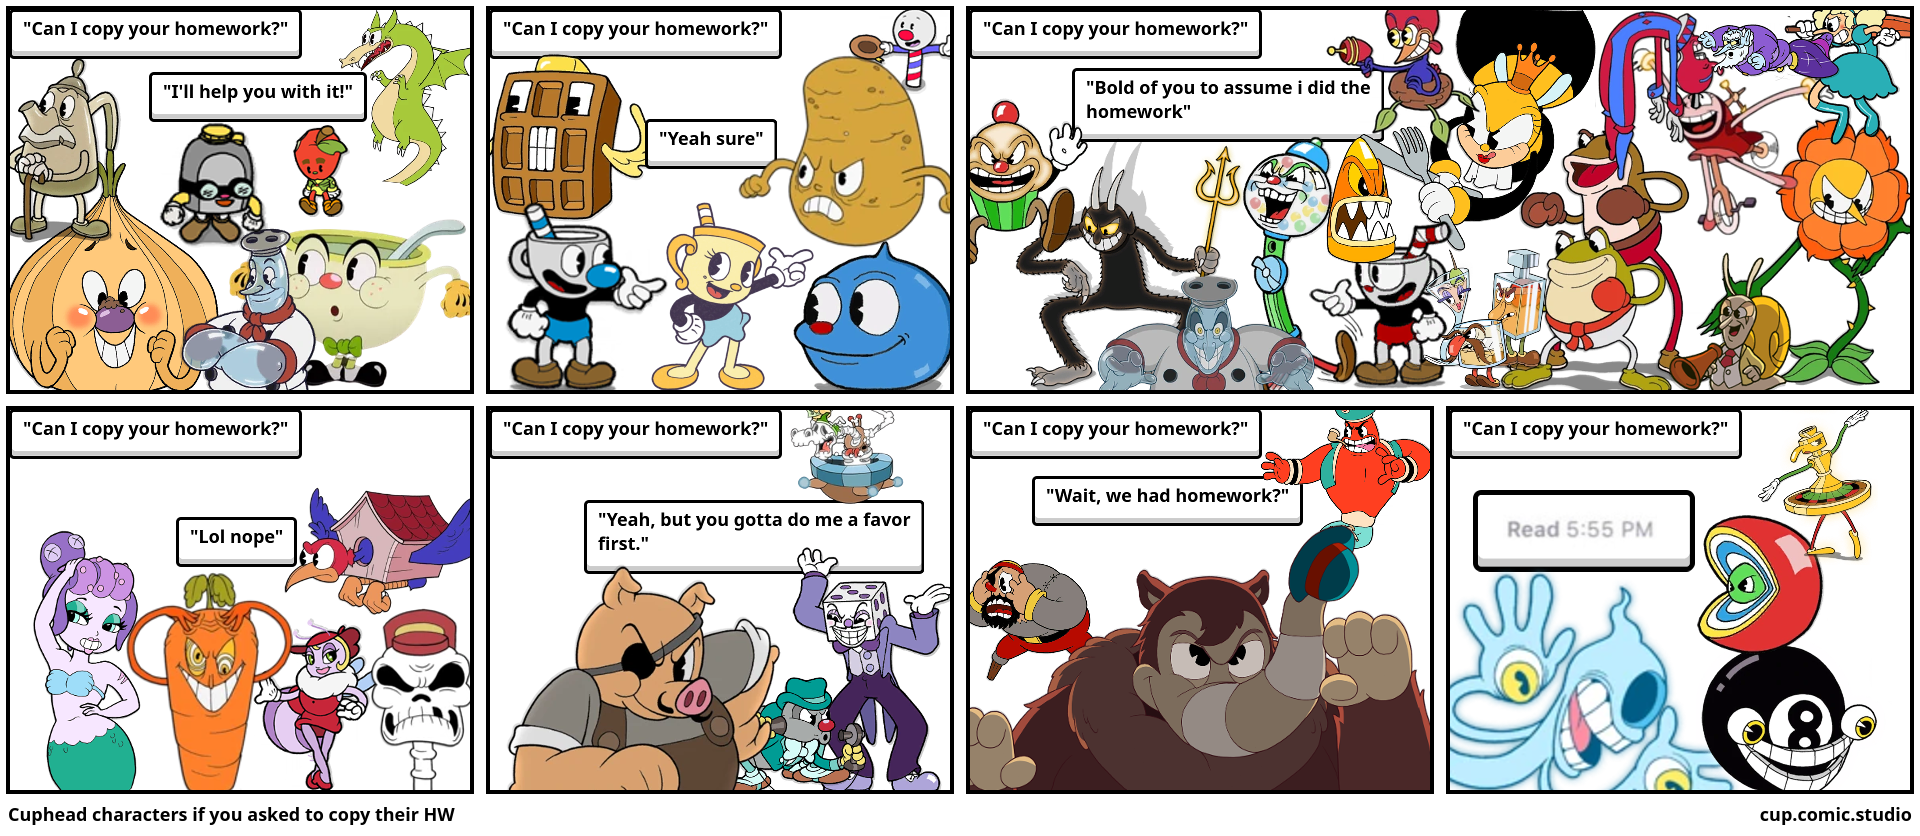 Cuphead characters if you asked to copy their HW